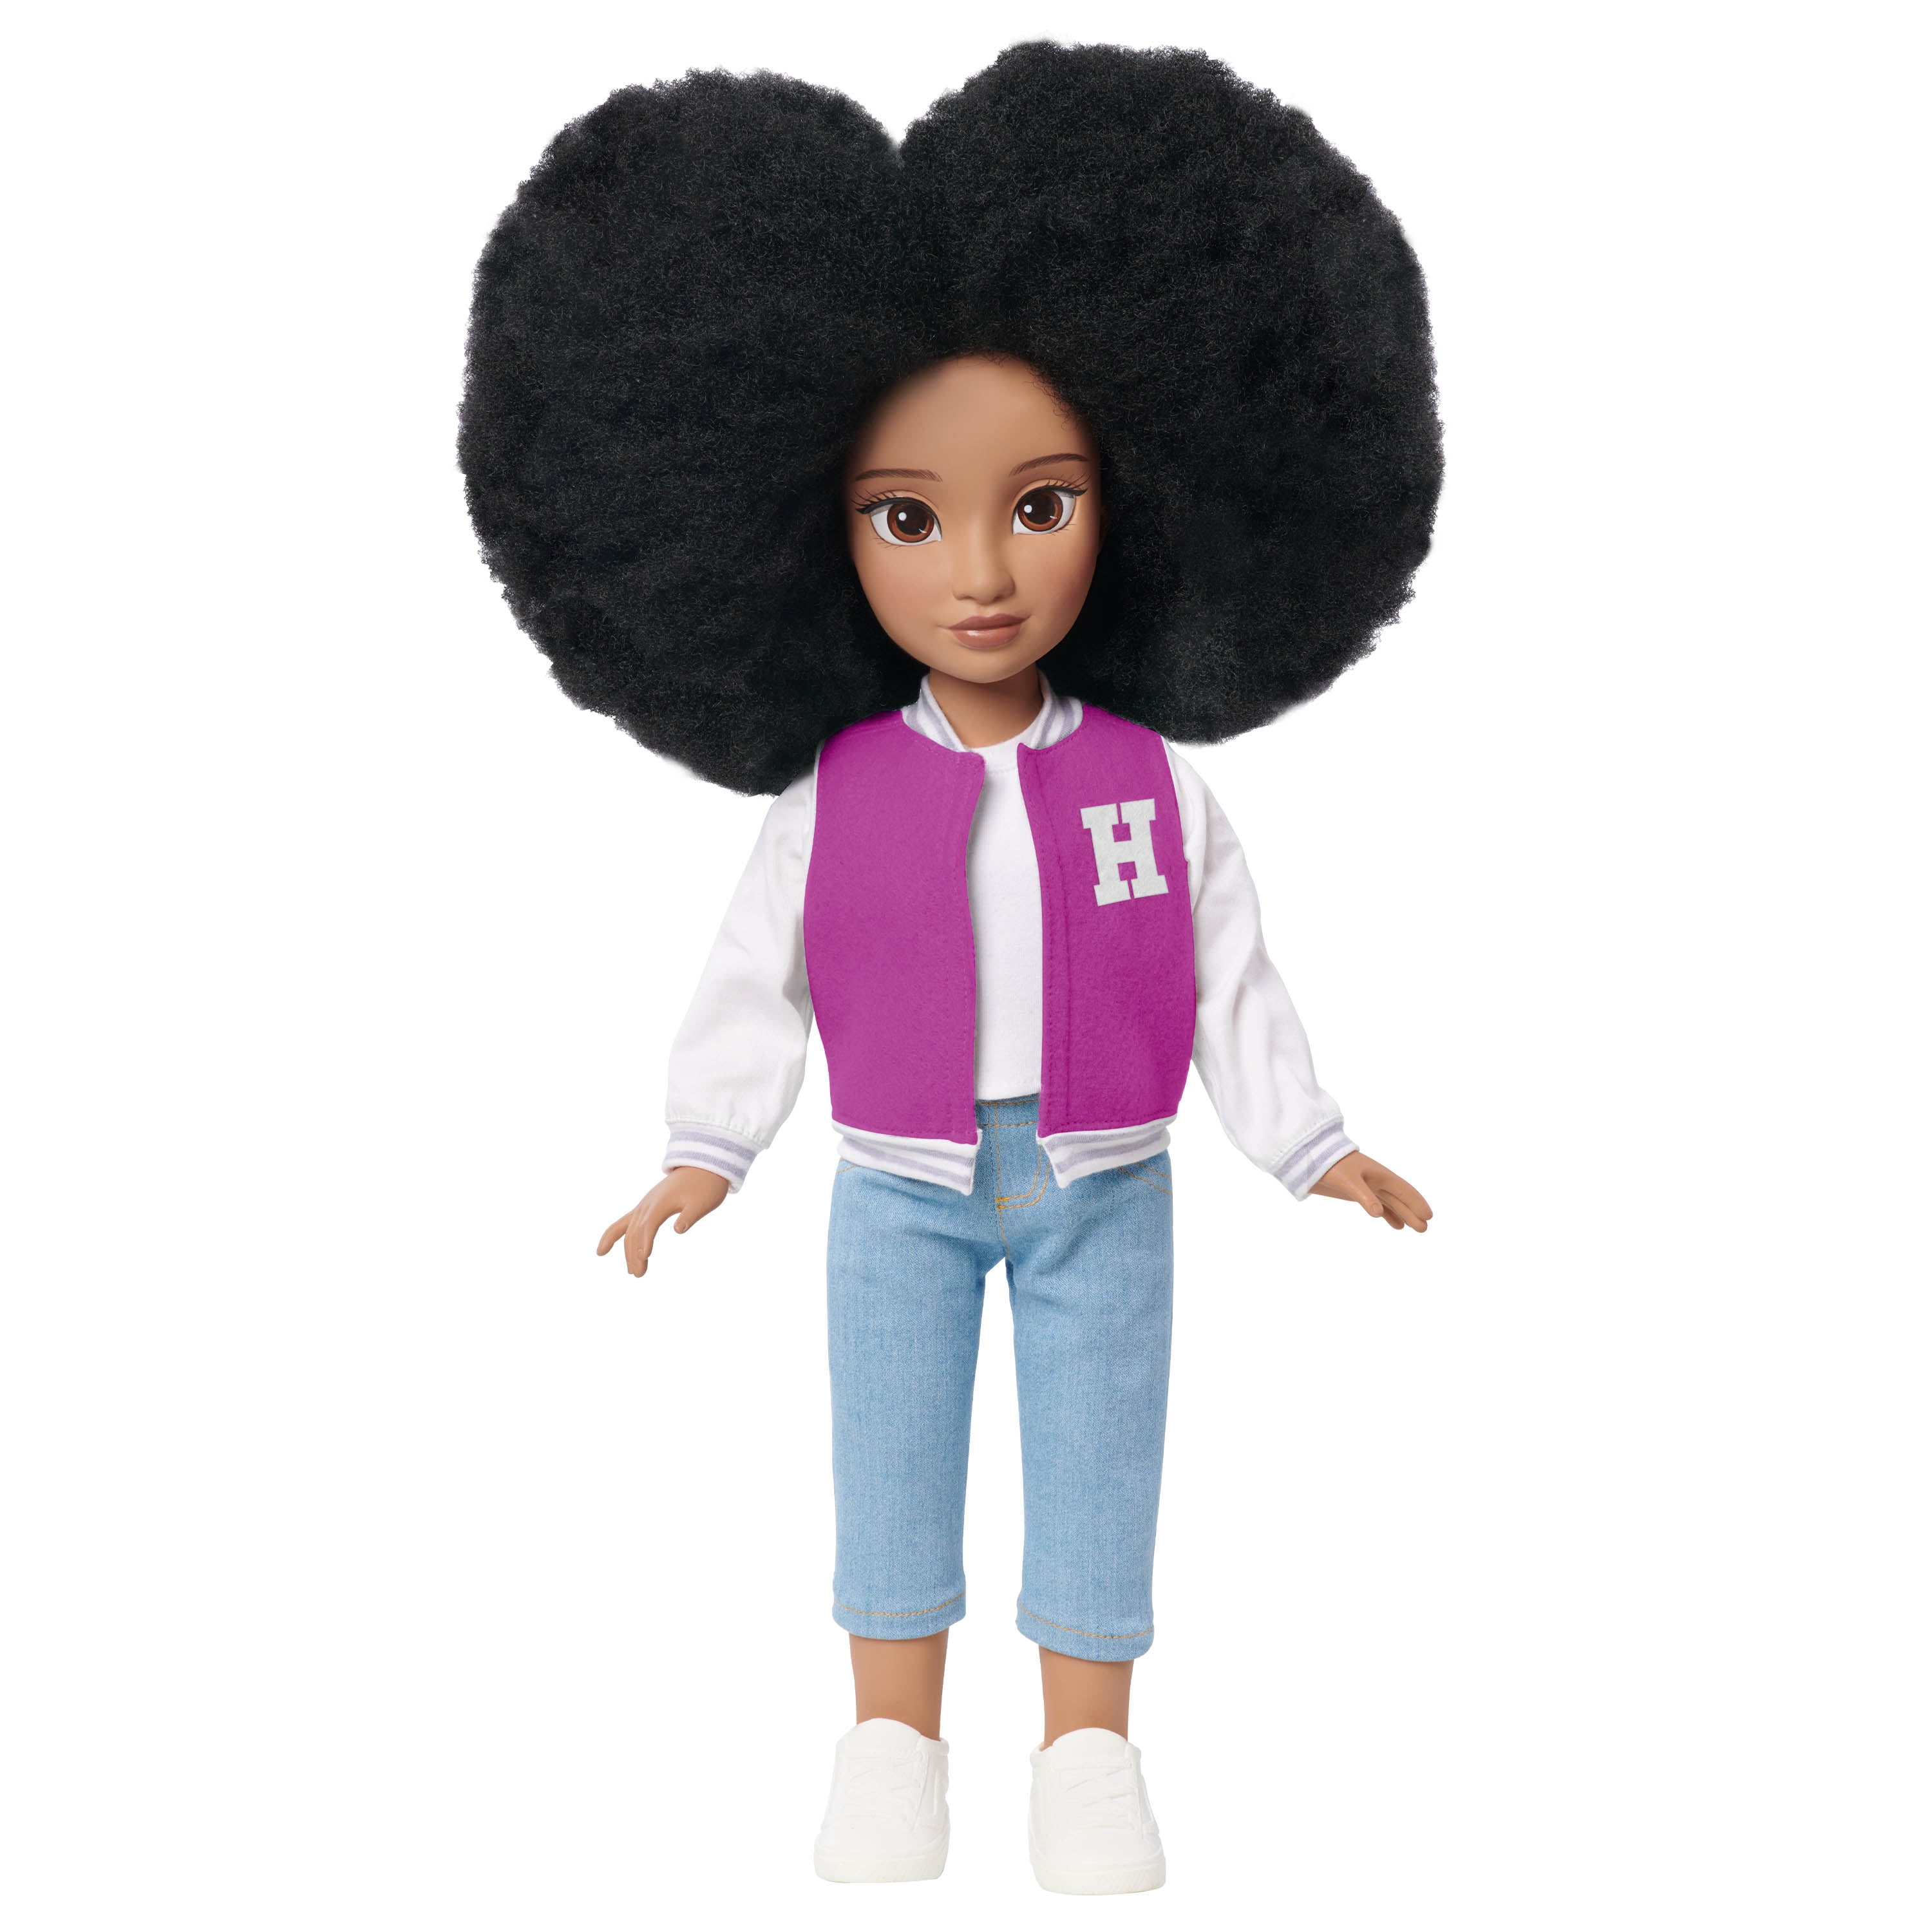 HBCyoU Student Body President Hope 18-inch Doll & Accessories, Coily Hair, Light Brown Skin Tone